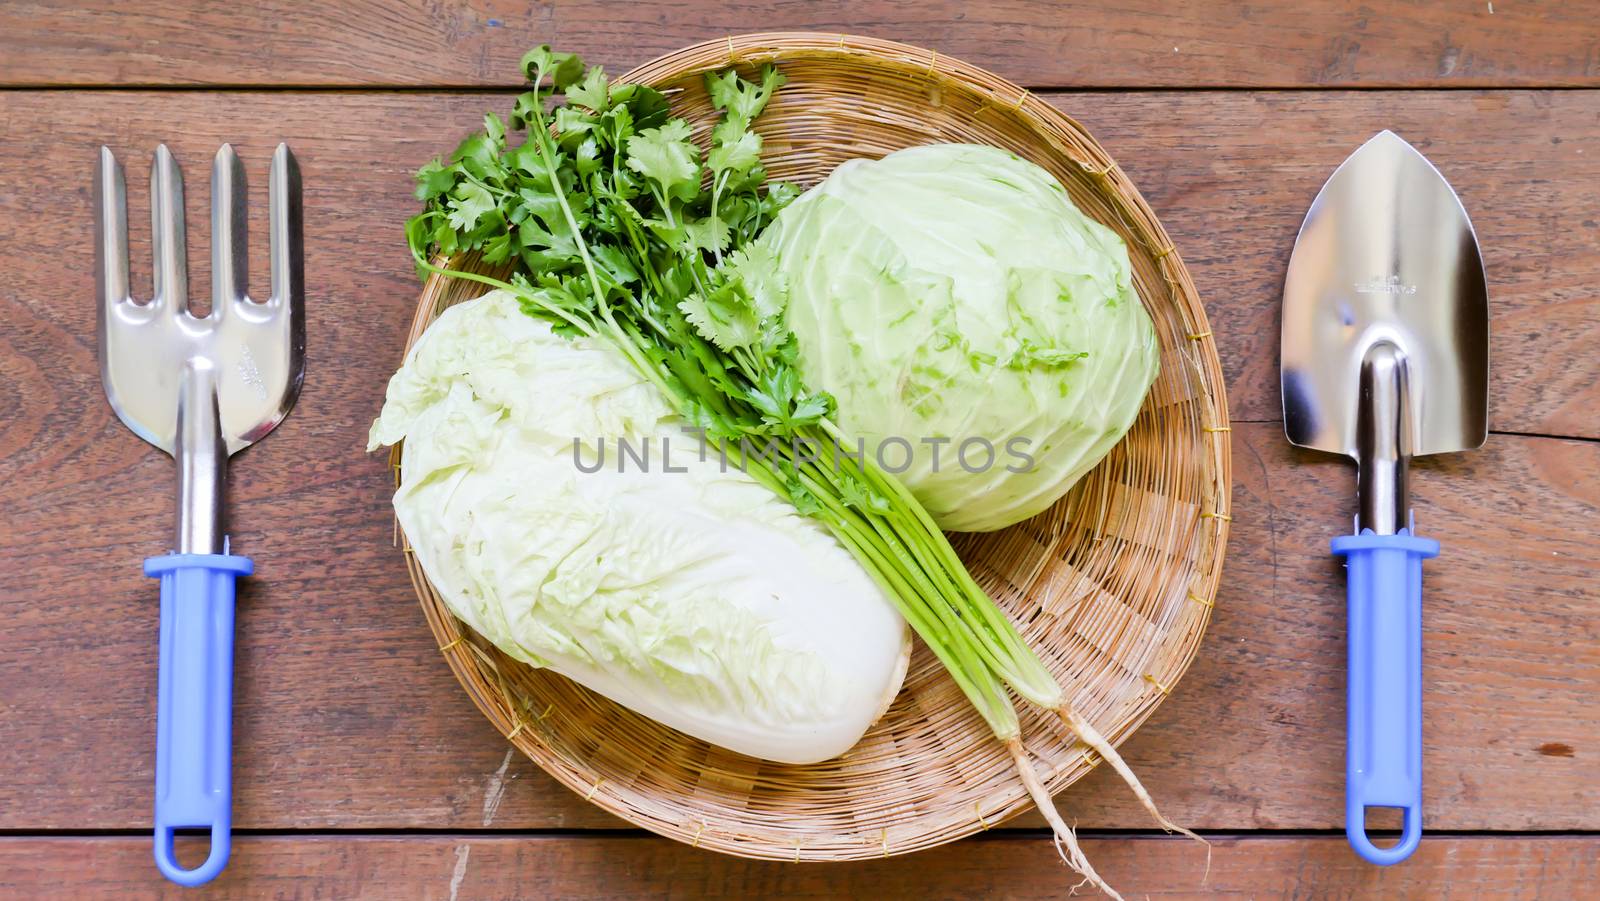 Vegetables with Gardening tools on wooden table background.